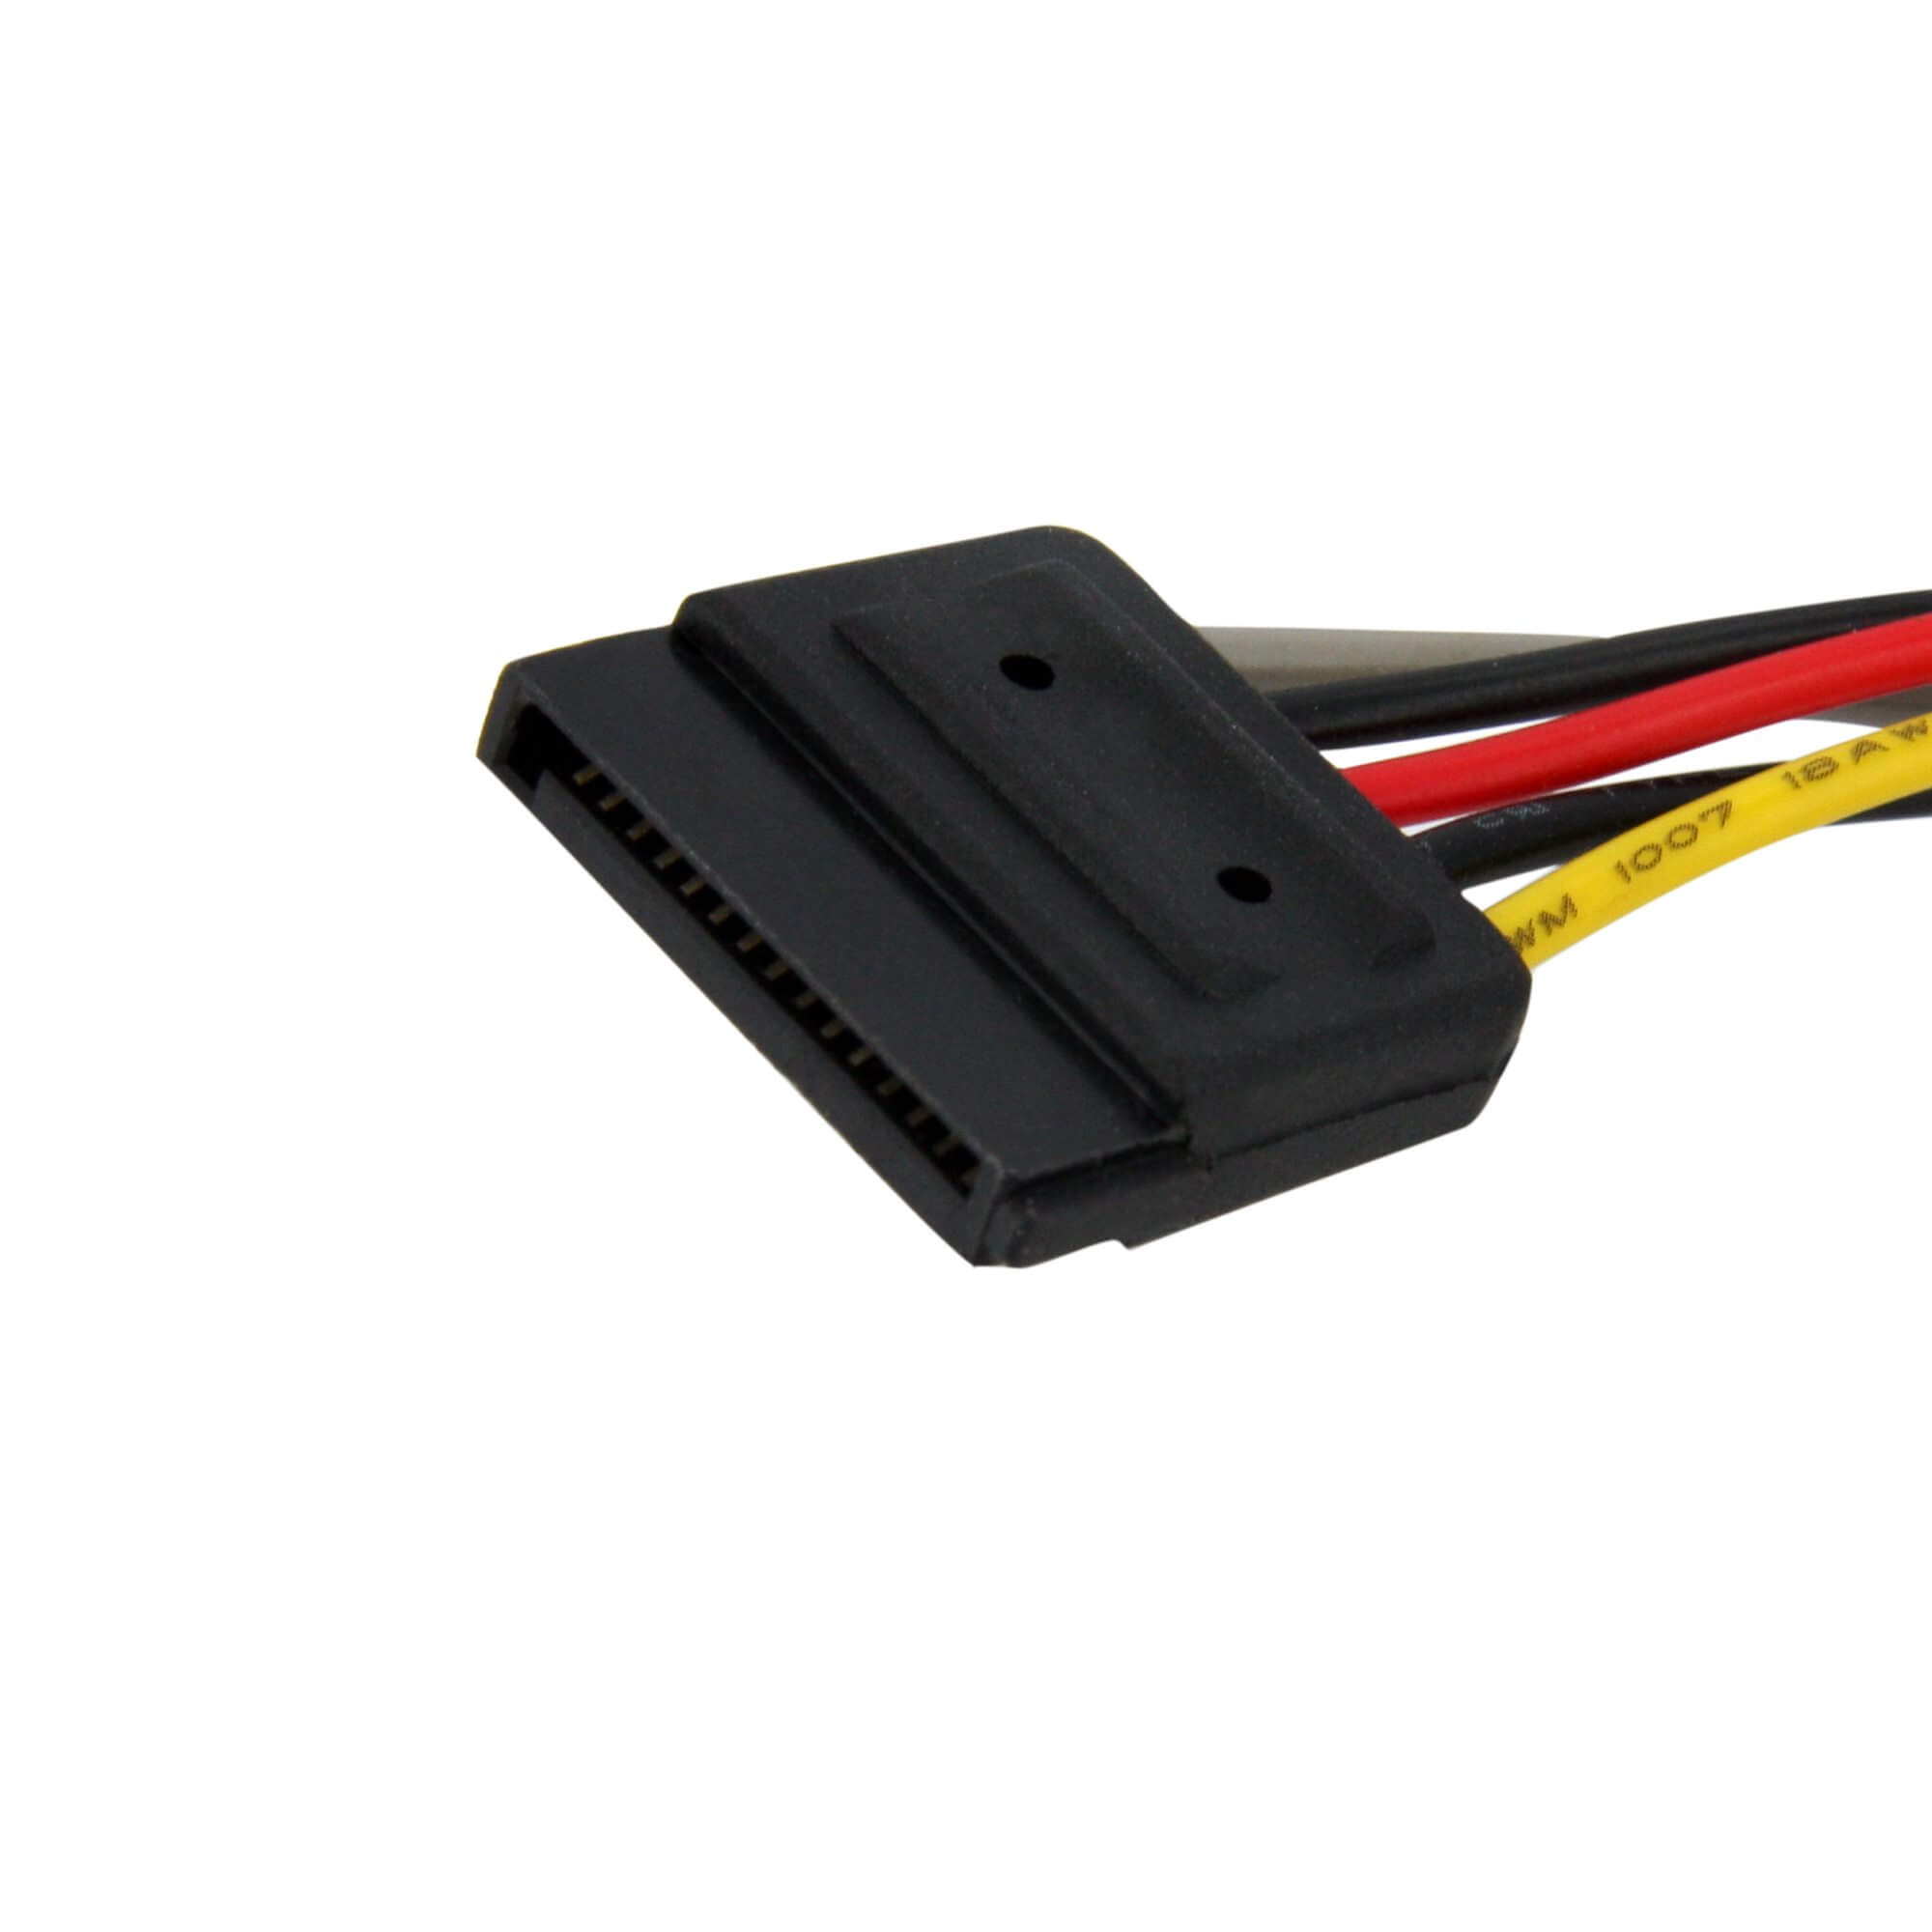 Cable splitter SATA to LP4 with 2x SATA Power Splitter Cable -4